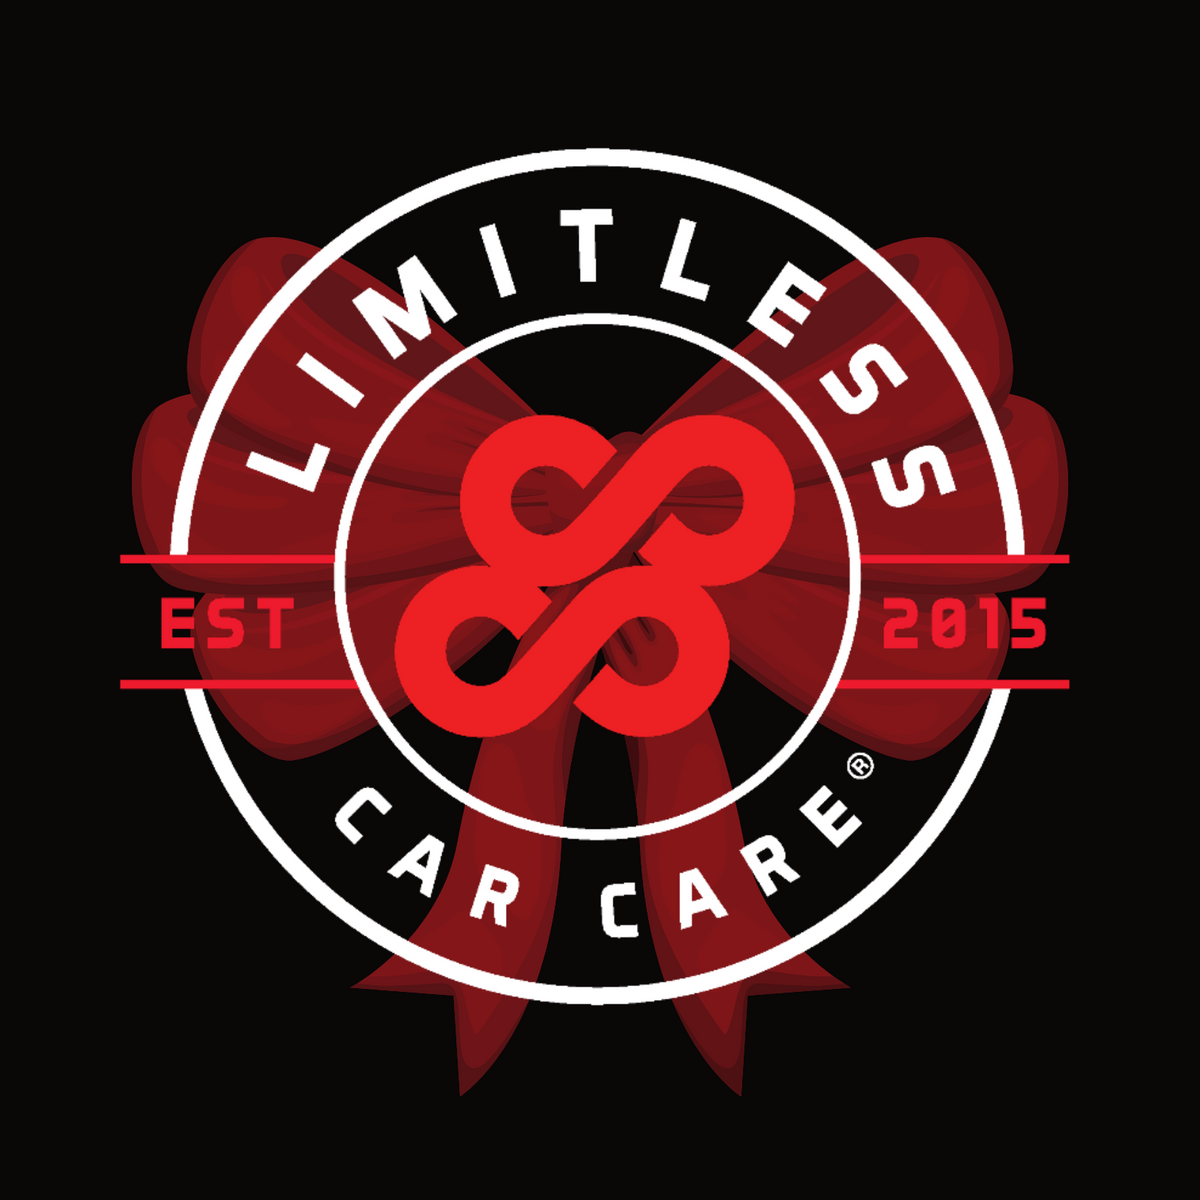 Limitless Car Care Decon All Purpose Cleaner & Degreaser 32oz – Detailing  Connect